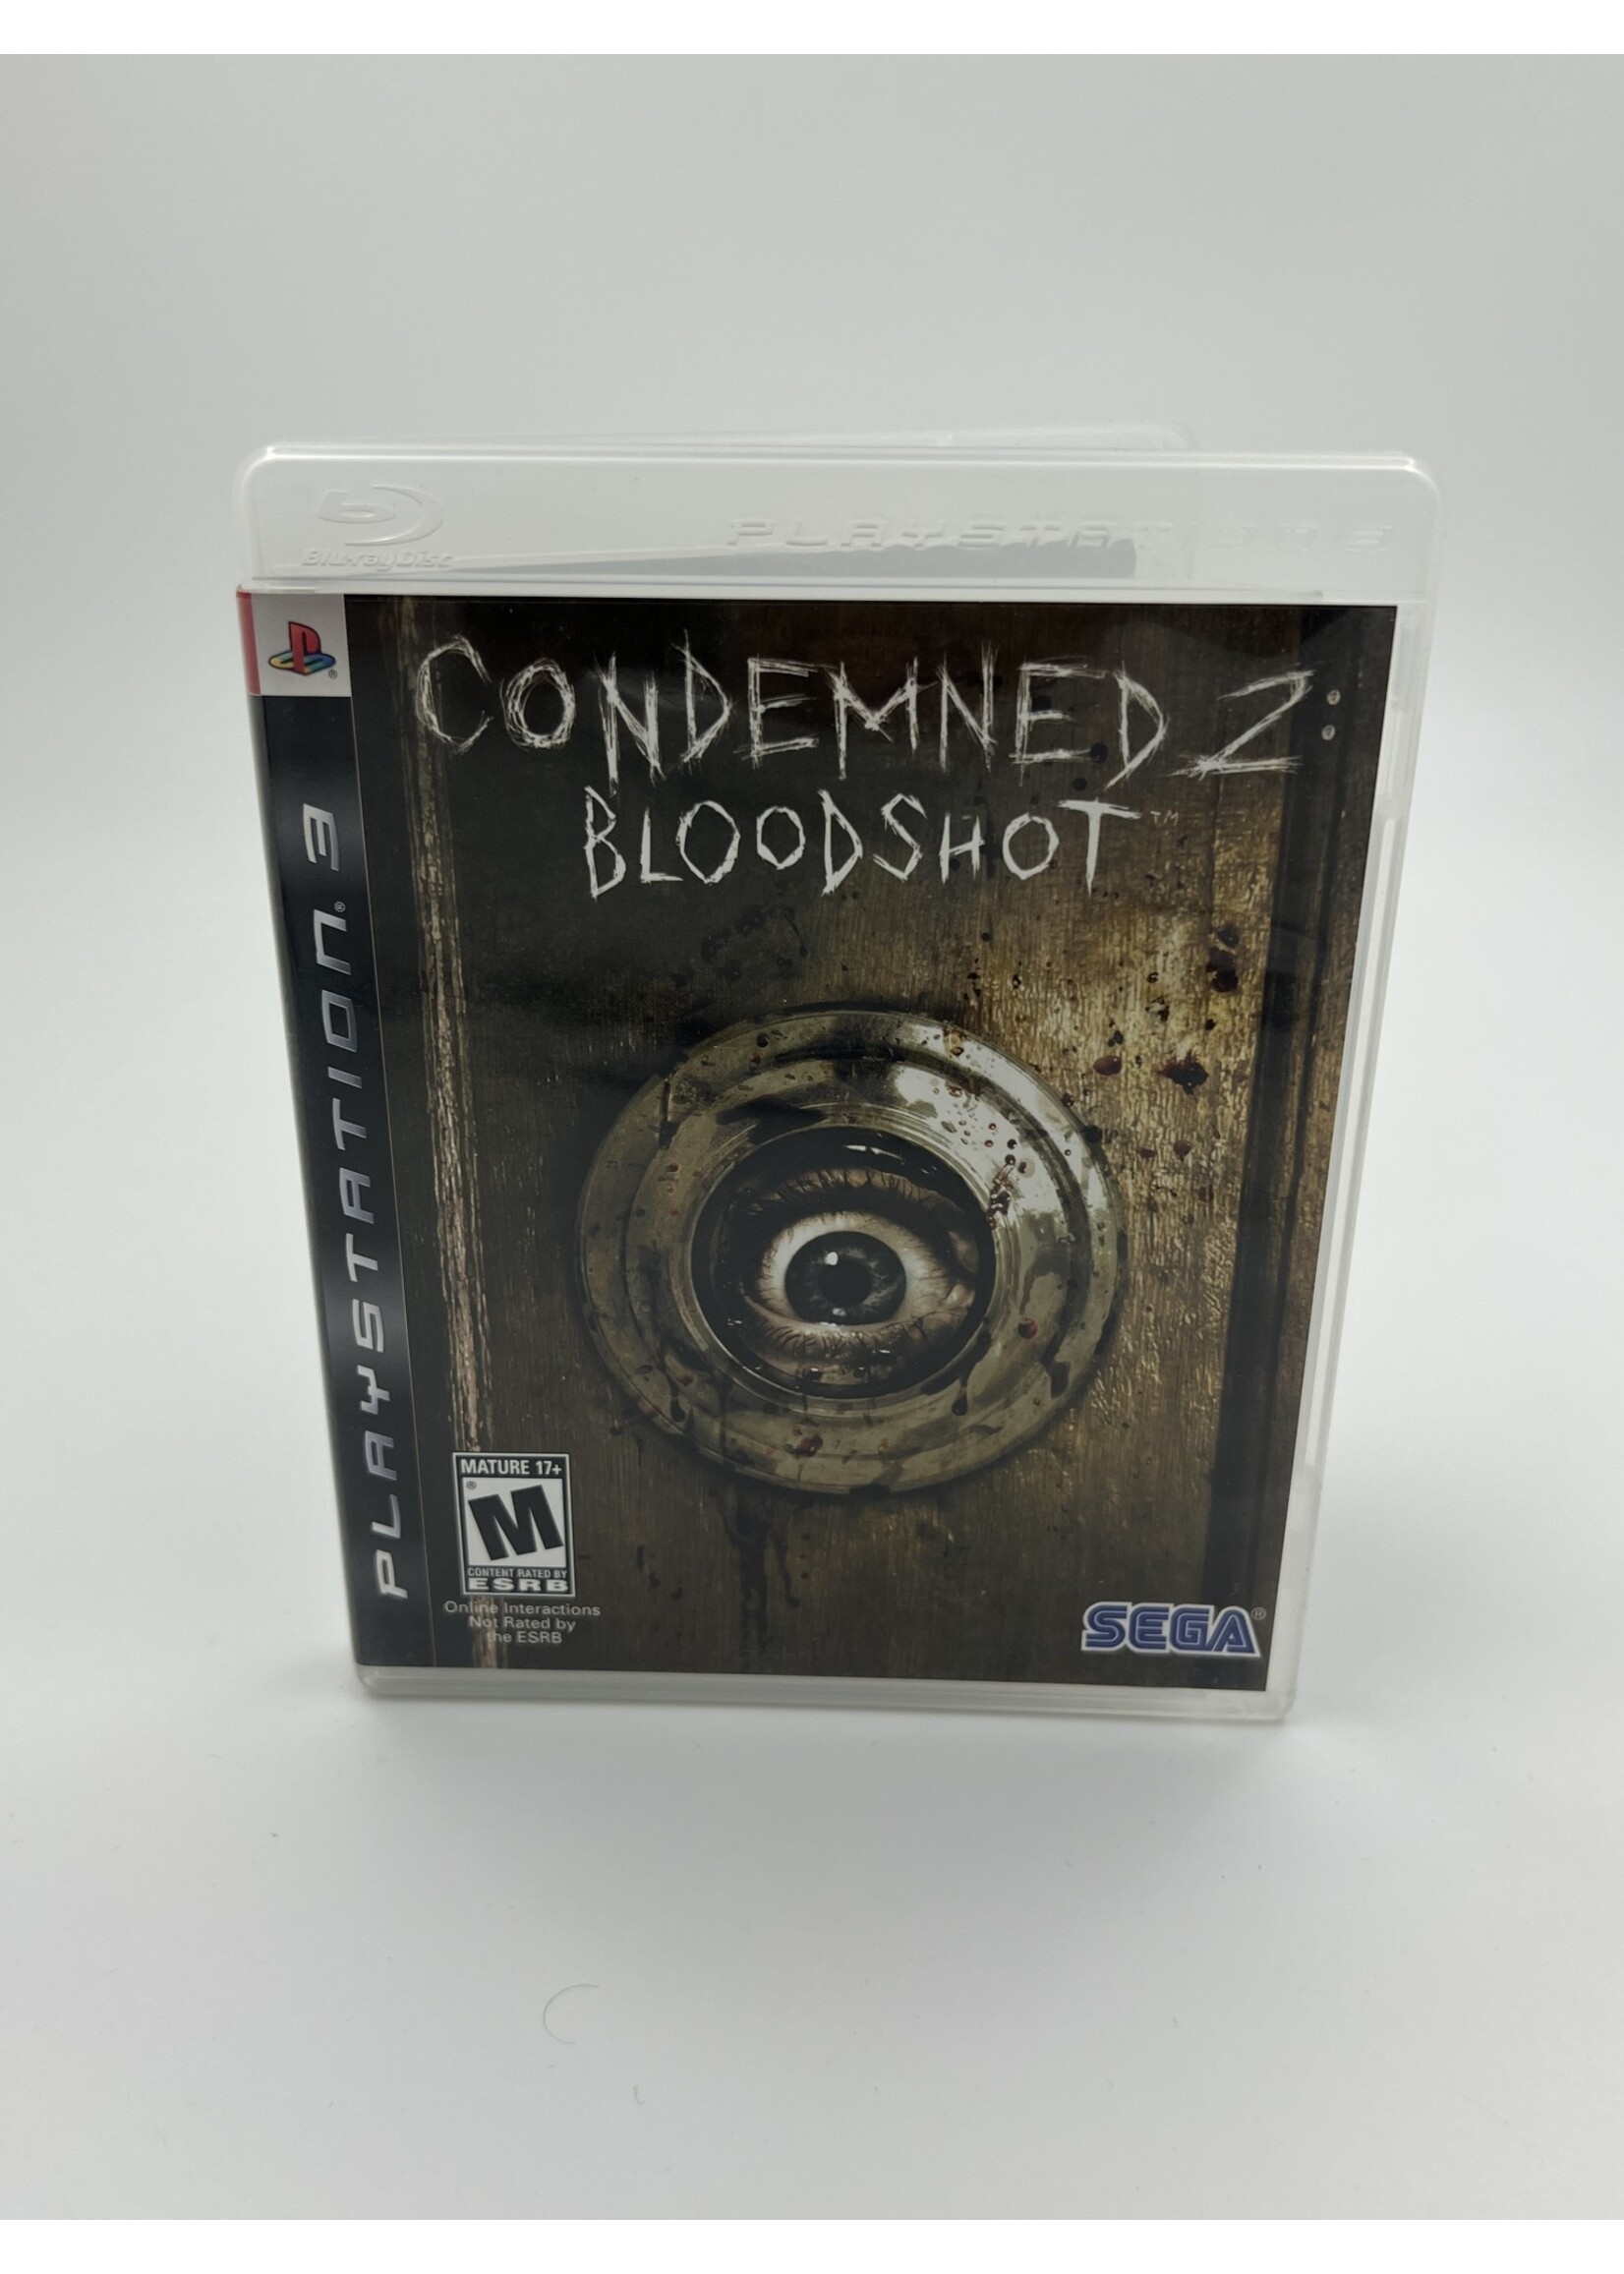 Sony Condemned 2 Bloodshot Ps3